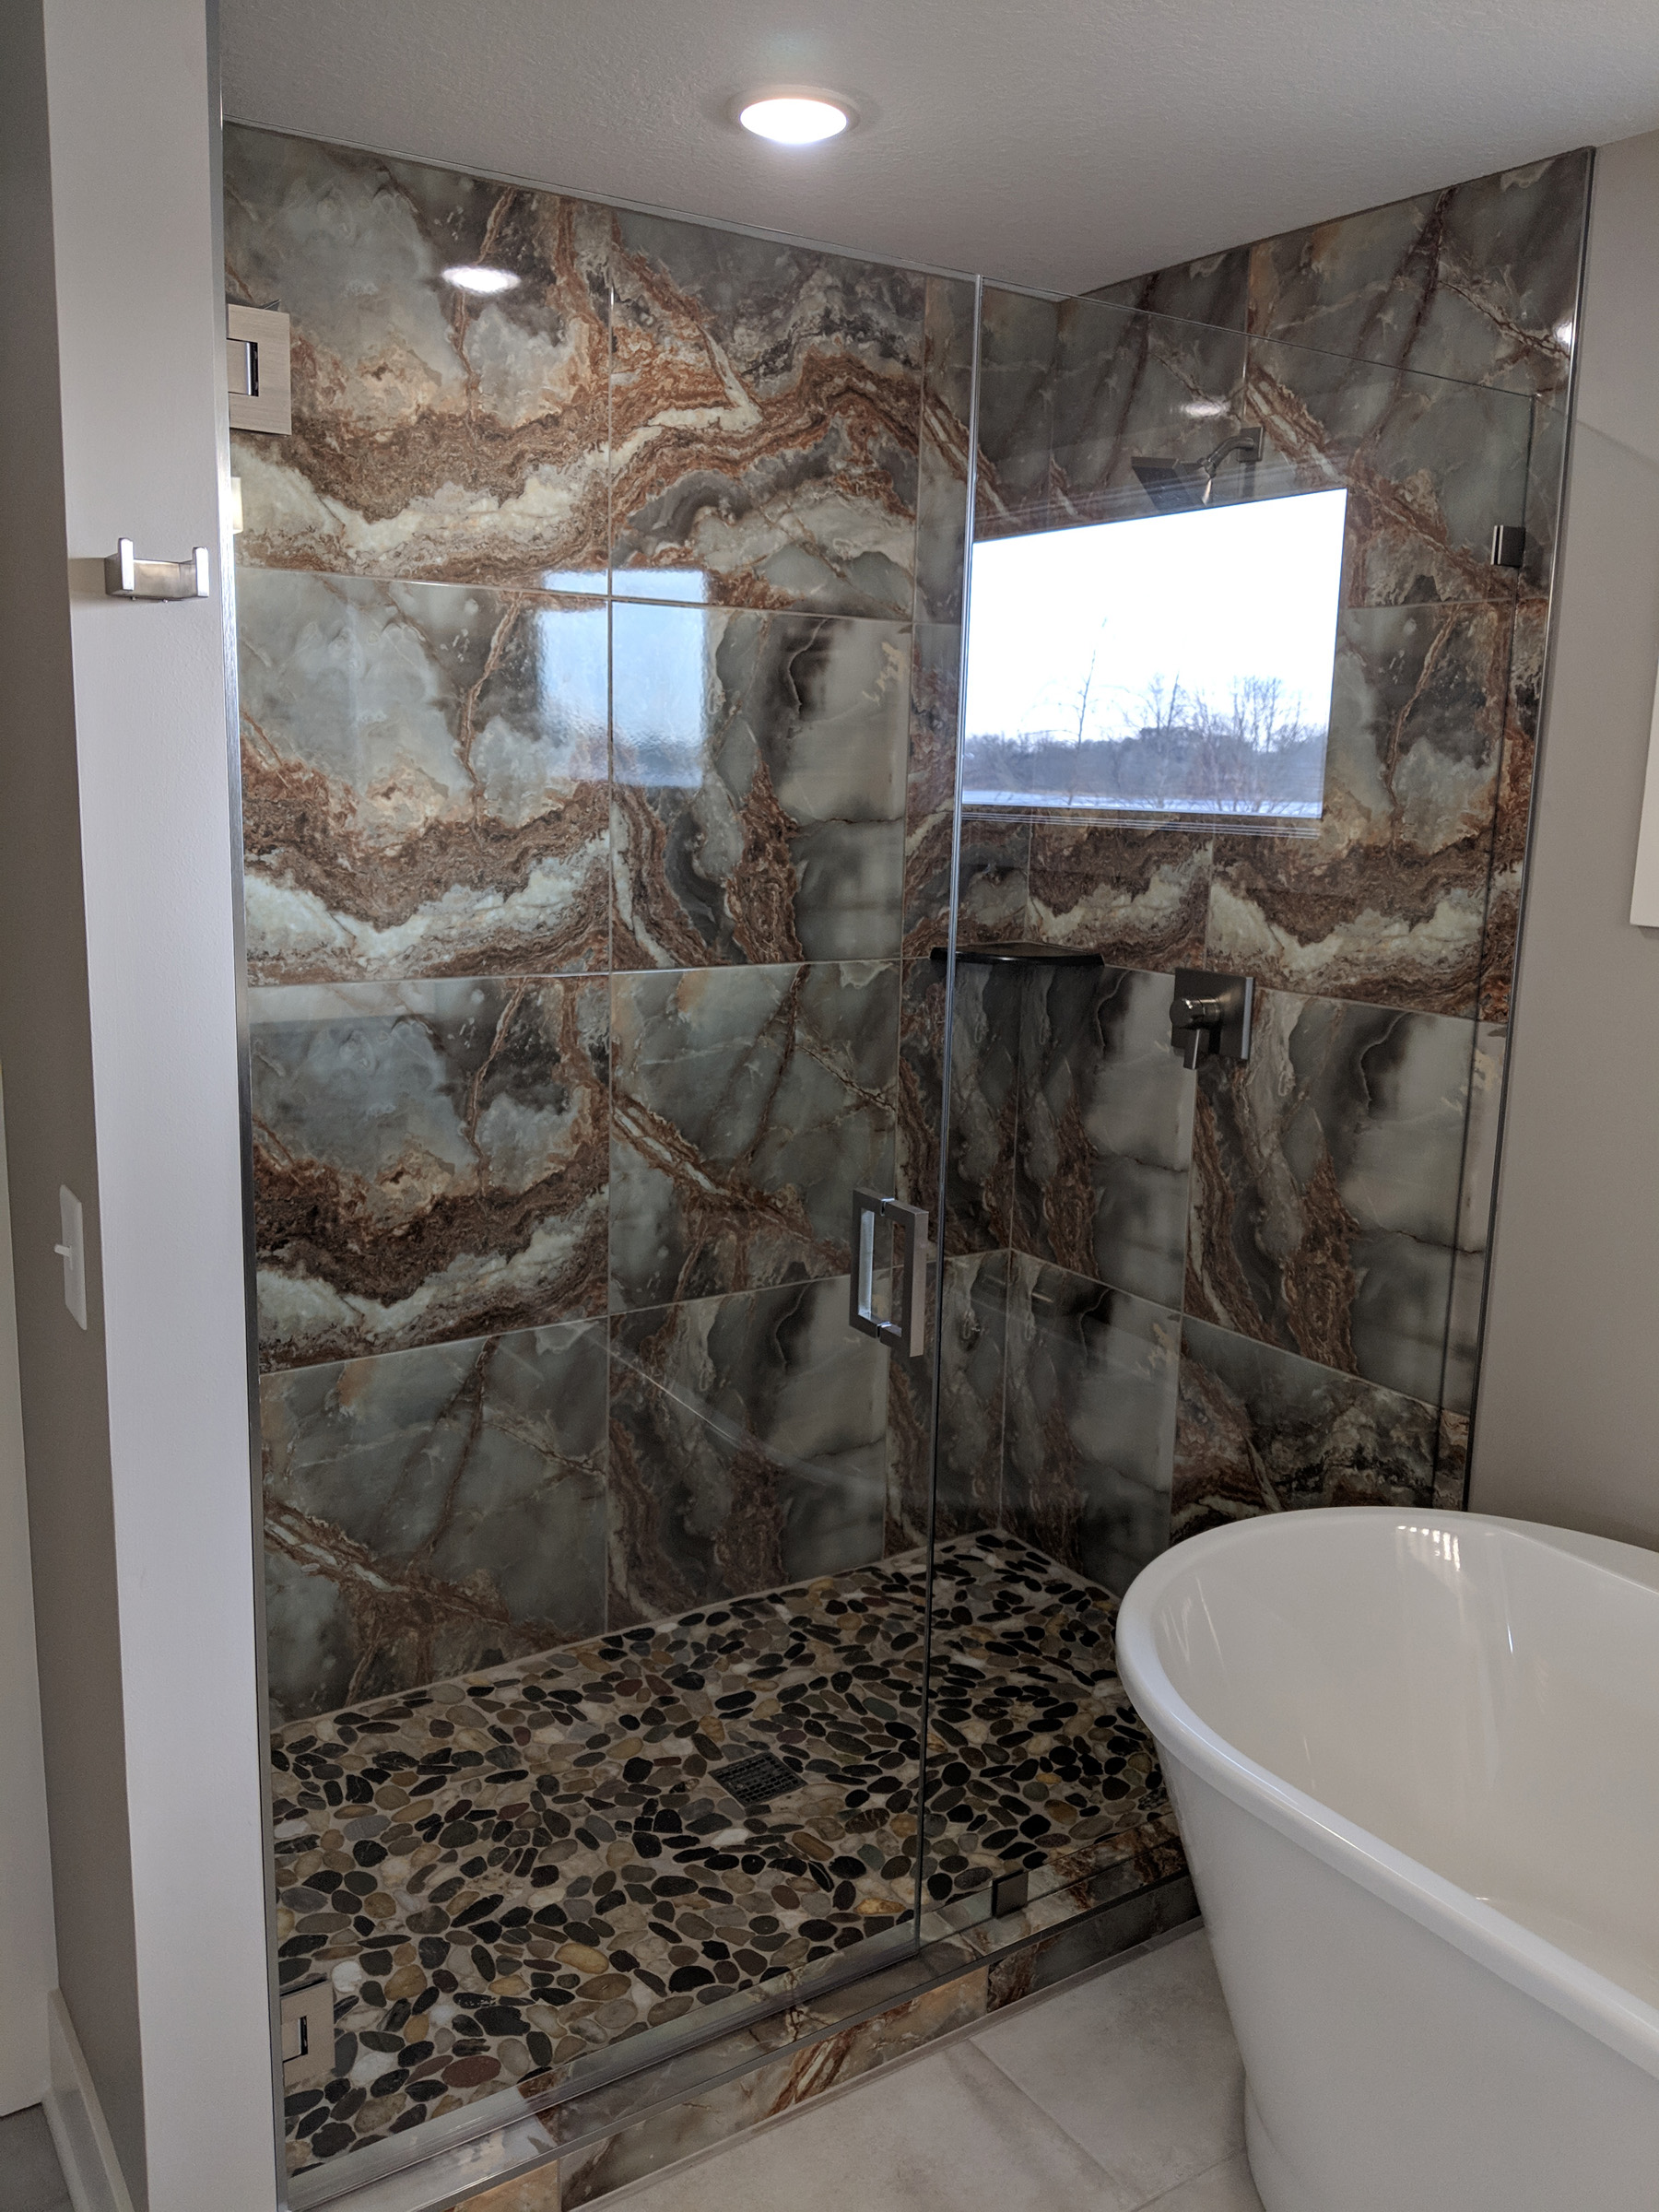 Stunning stone and tile shower with glass door